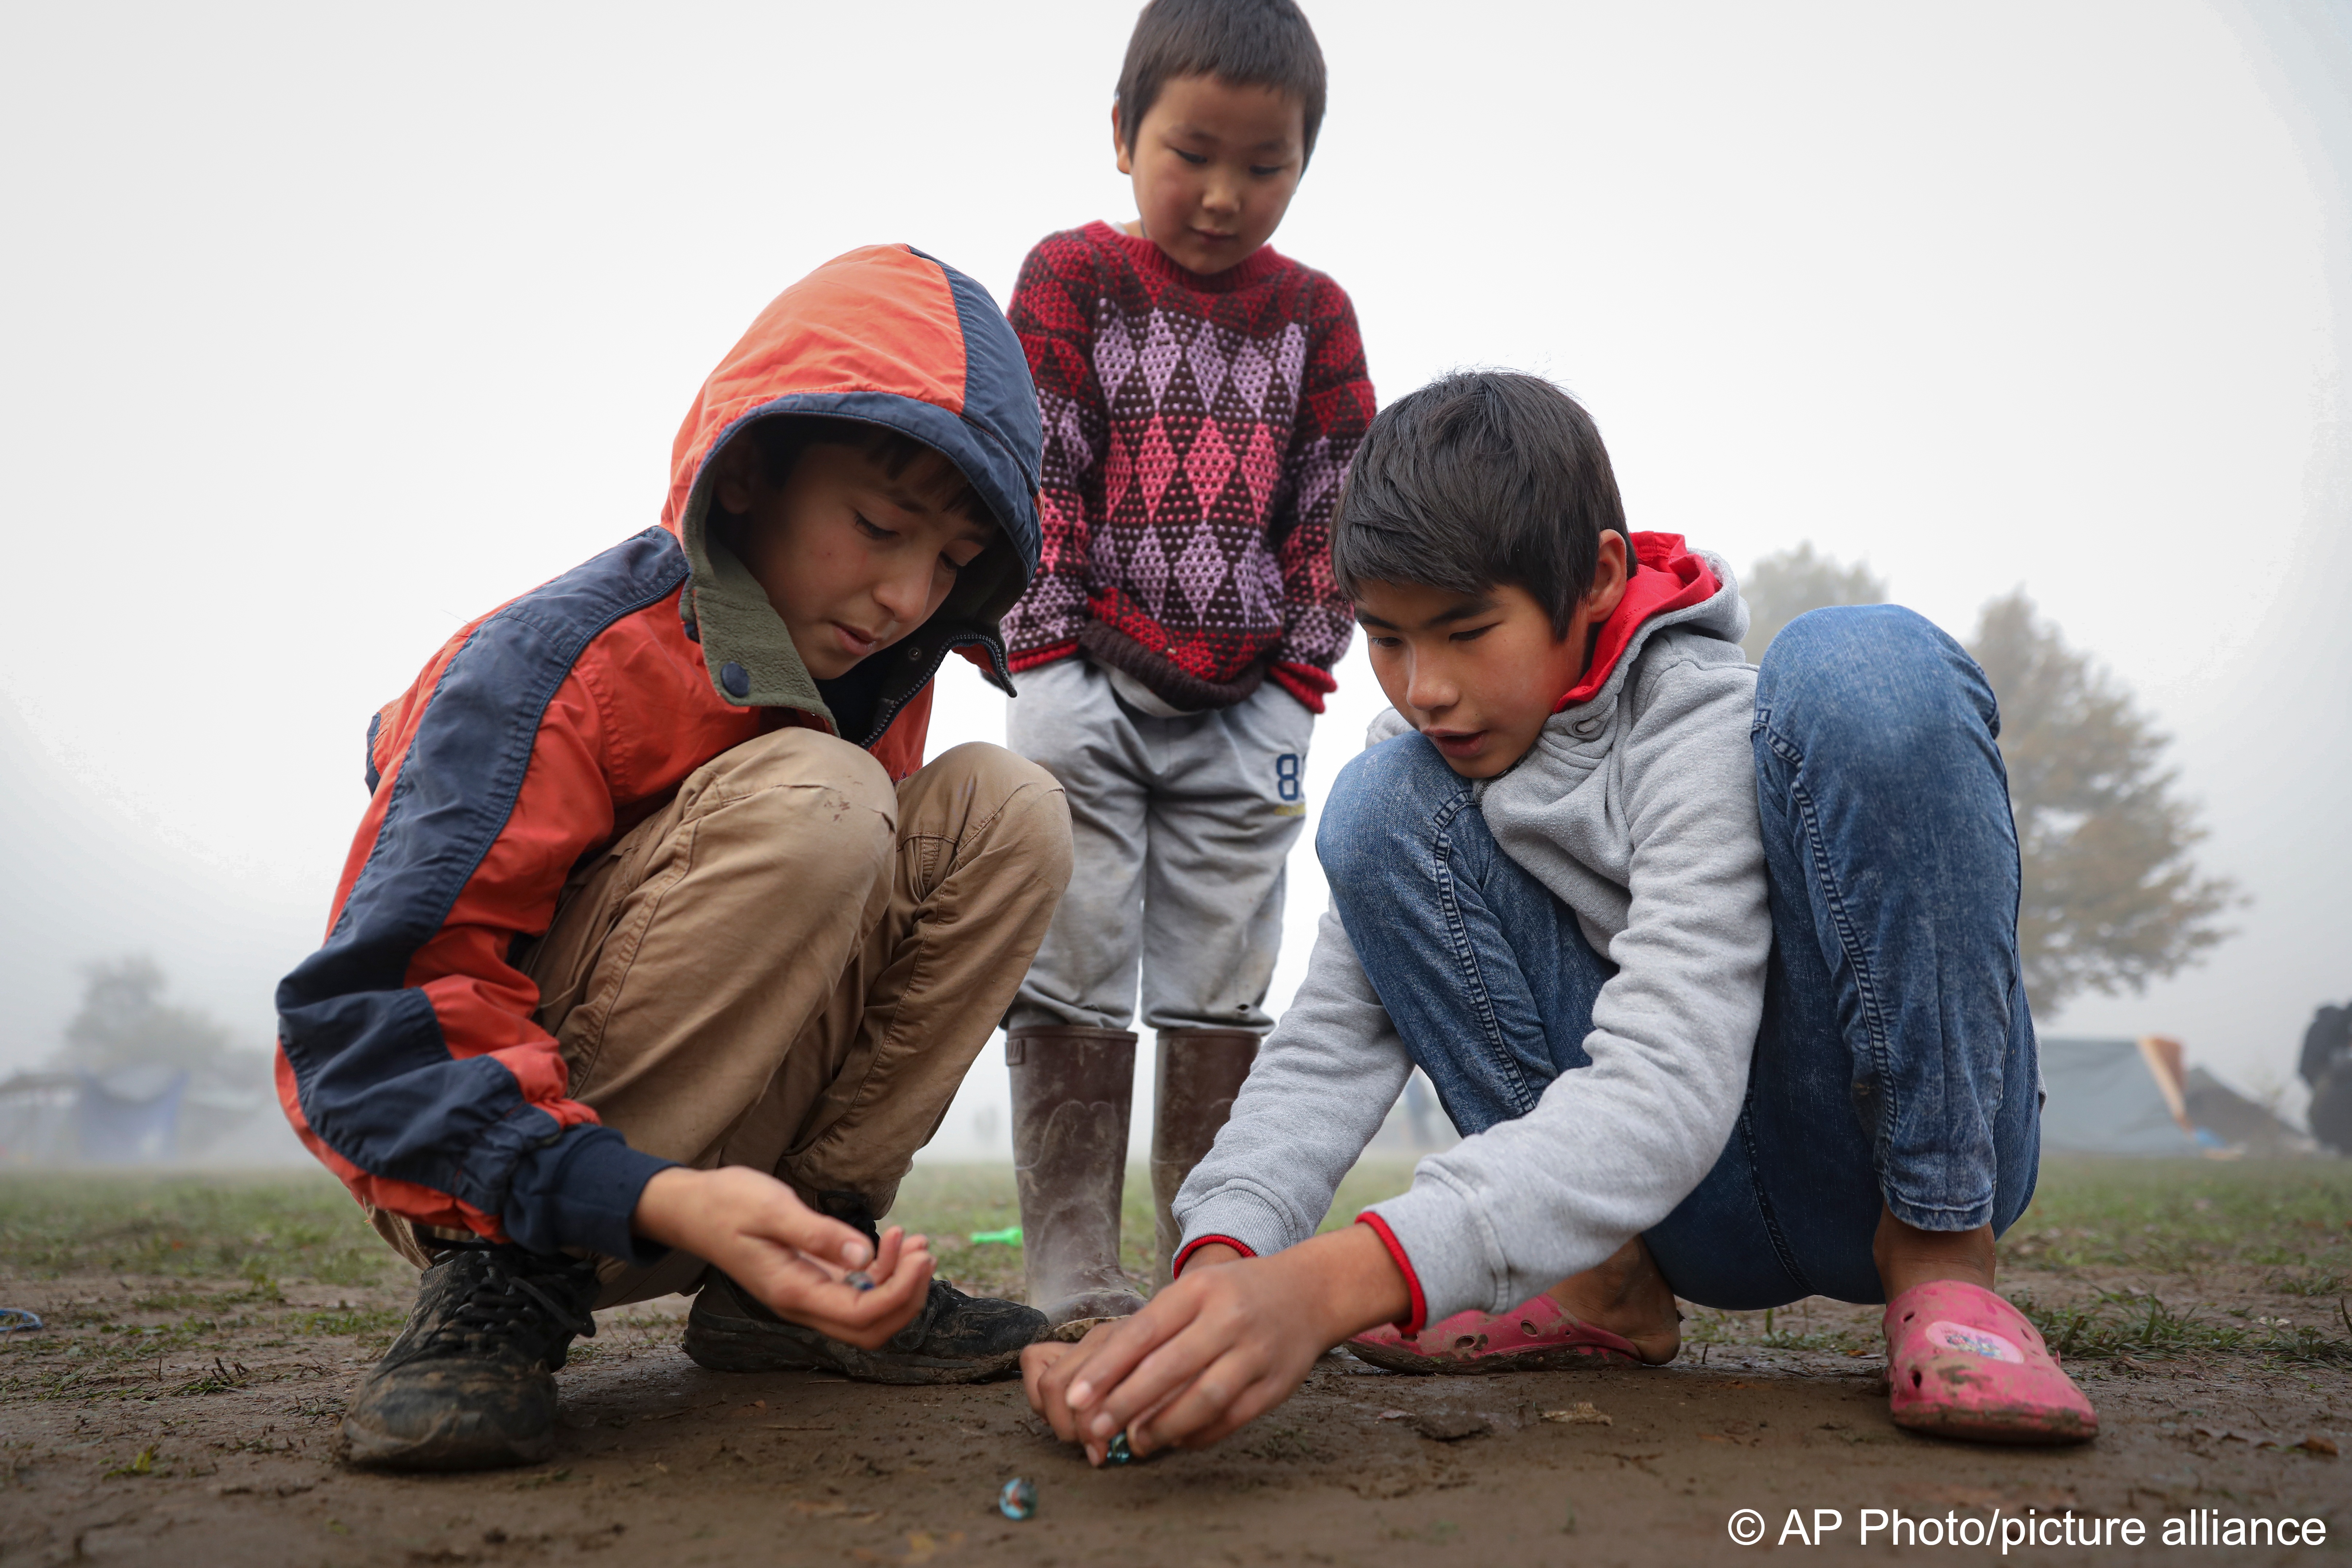 Migrant children play with marbles at a makeshift camp housing migrants mostly from Afghanistan, in Velika Kladusa, Bosnia, 12 October 2021 (photo: AP Photo)